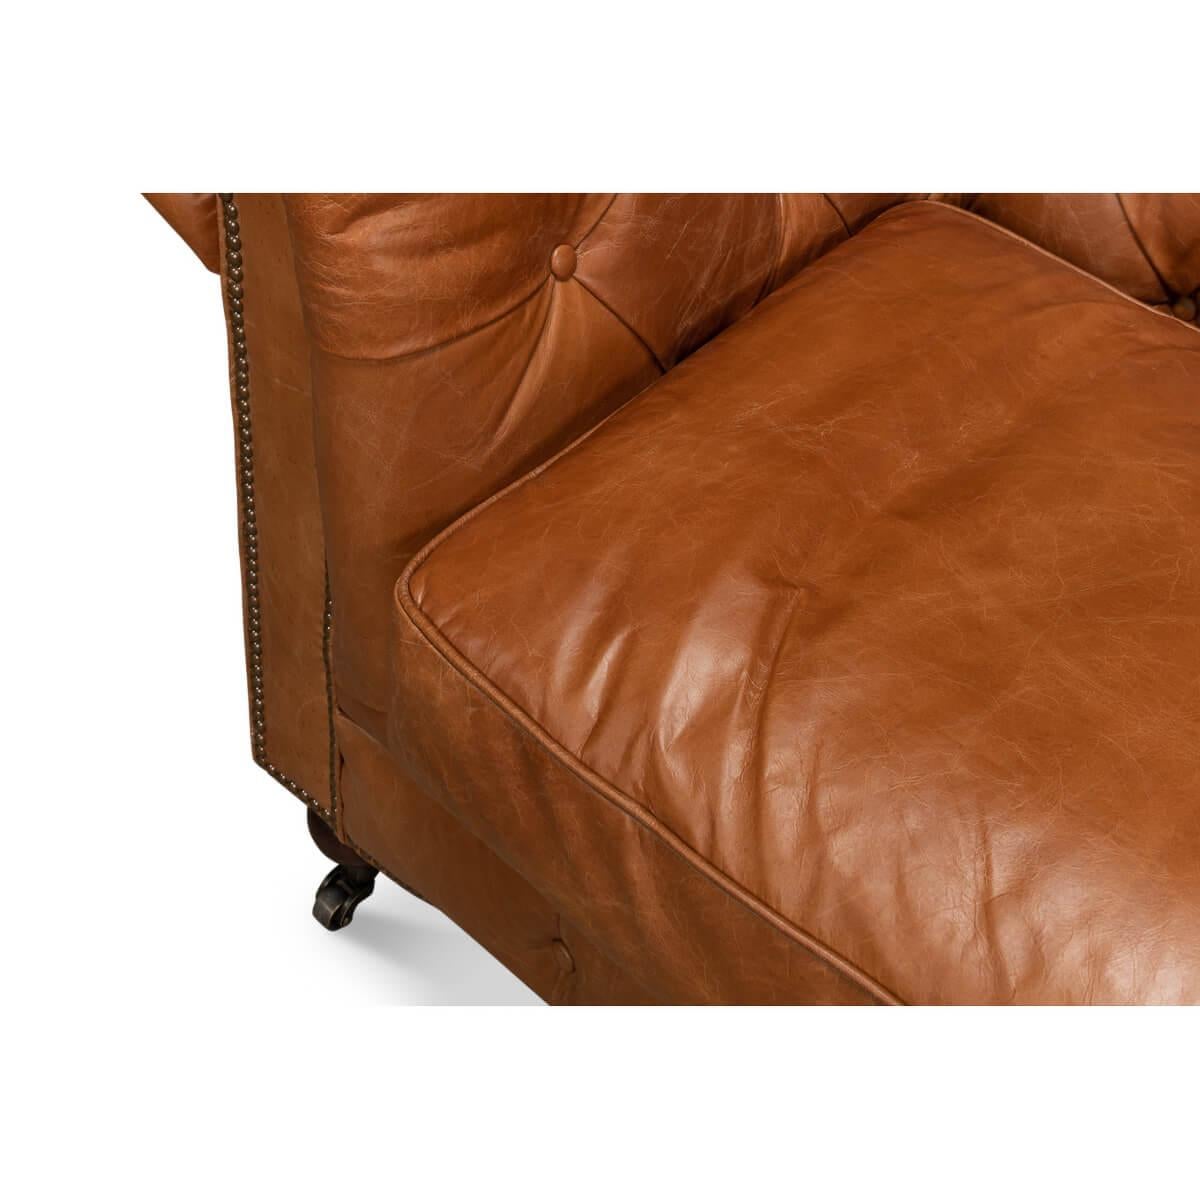 Vintage Style Classic Chesterfield Sofa - Vienna Brown Leather im Angebot 1